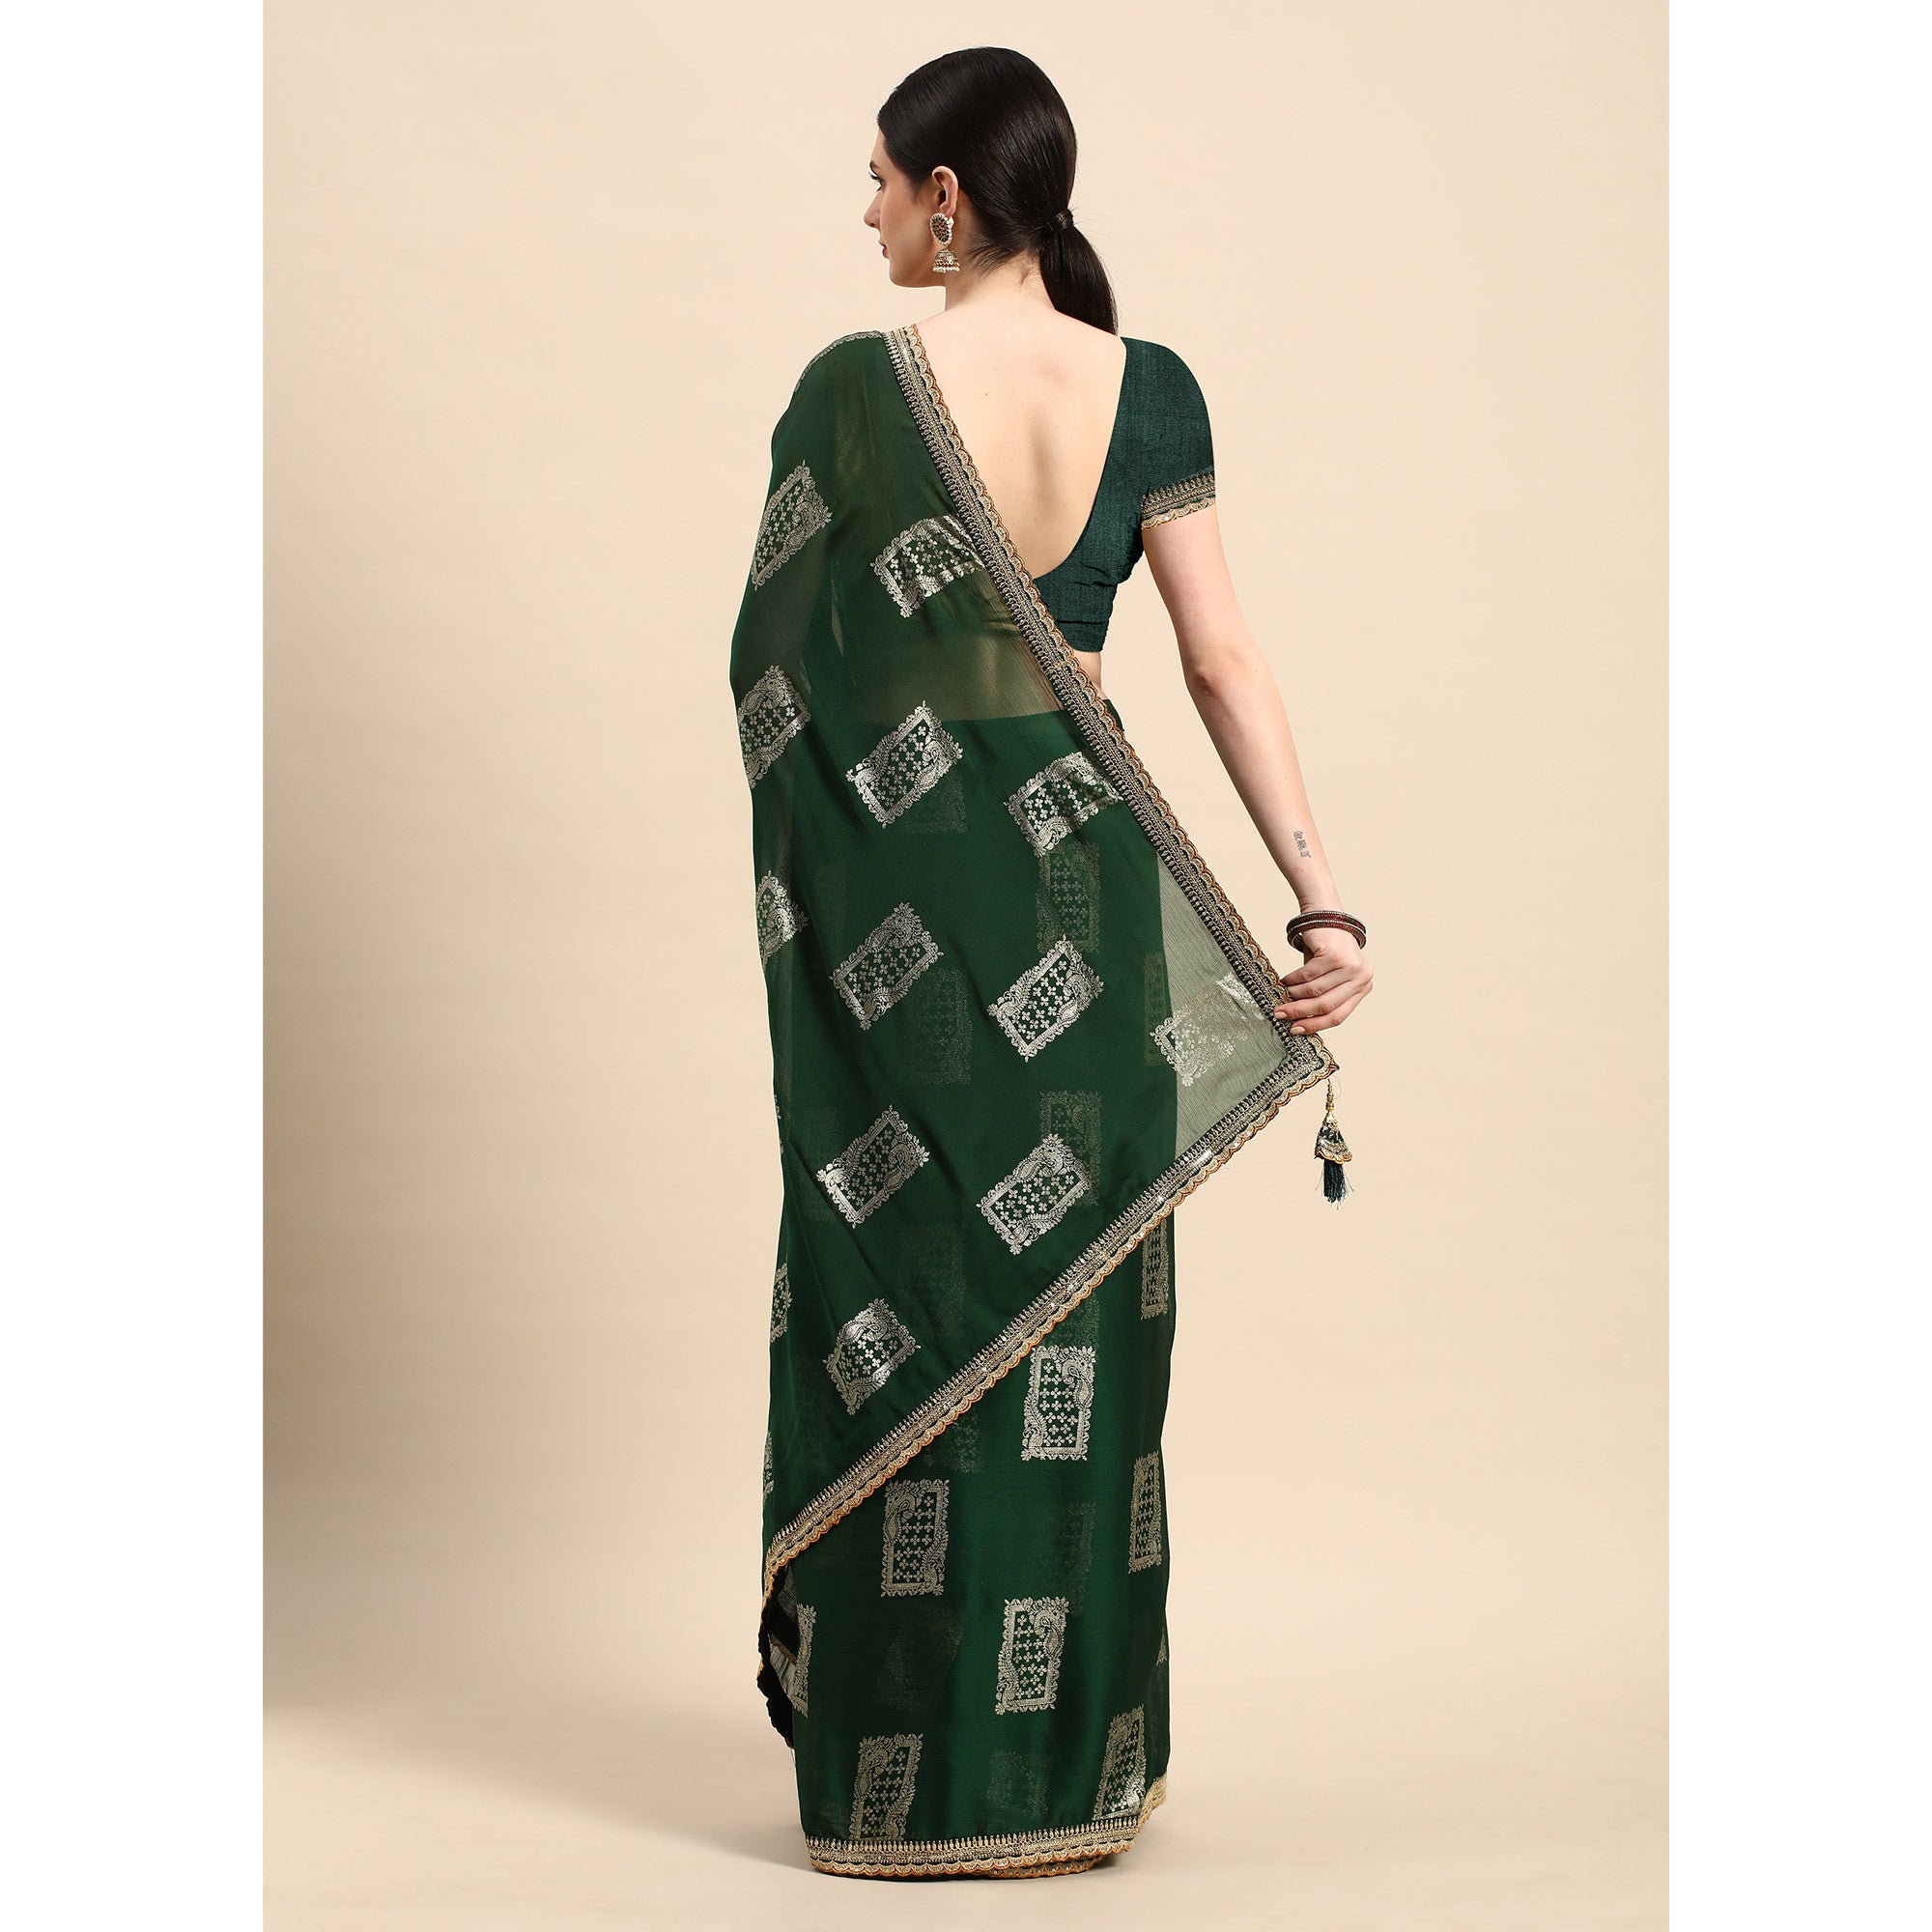 Green Foil Printed With Embroidered Border Chiffon Saree